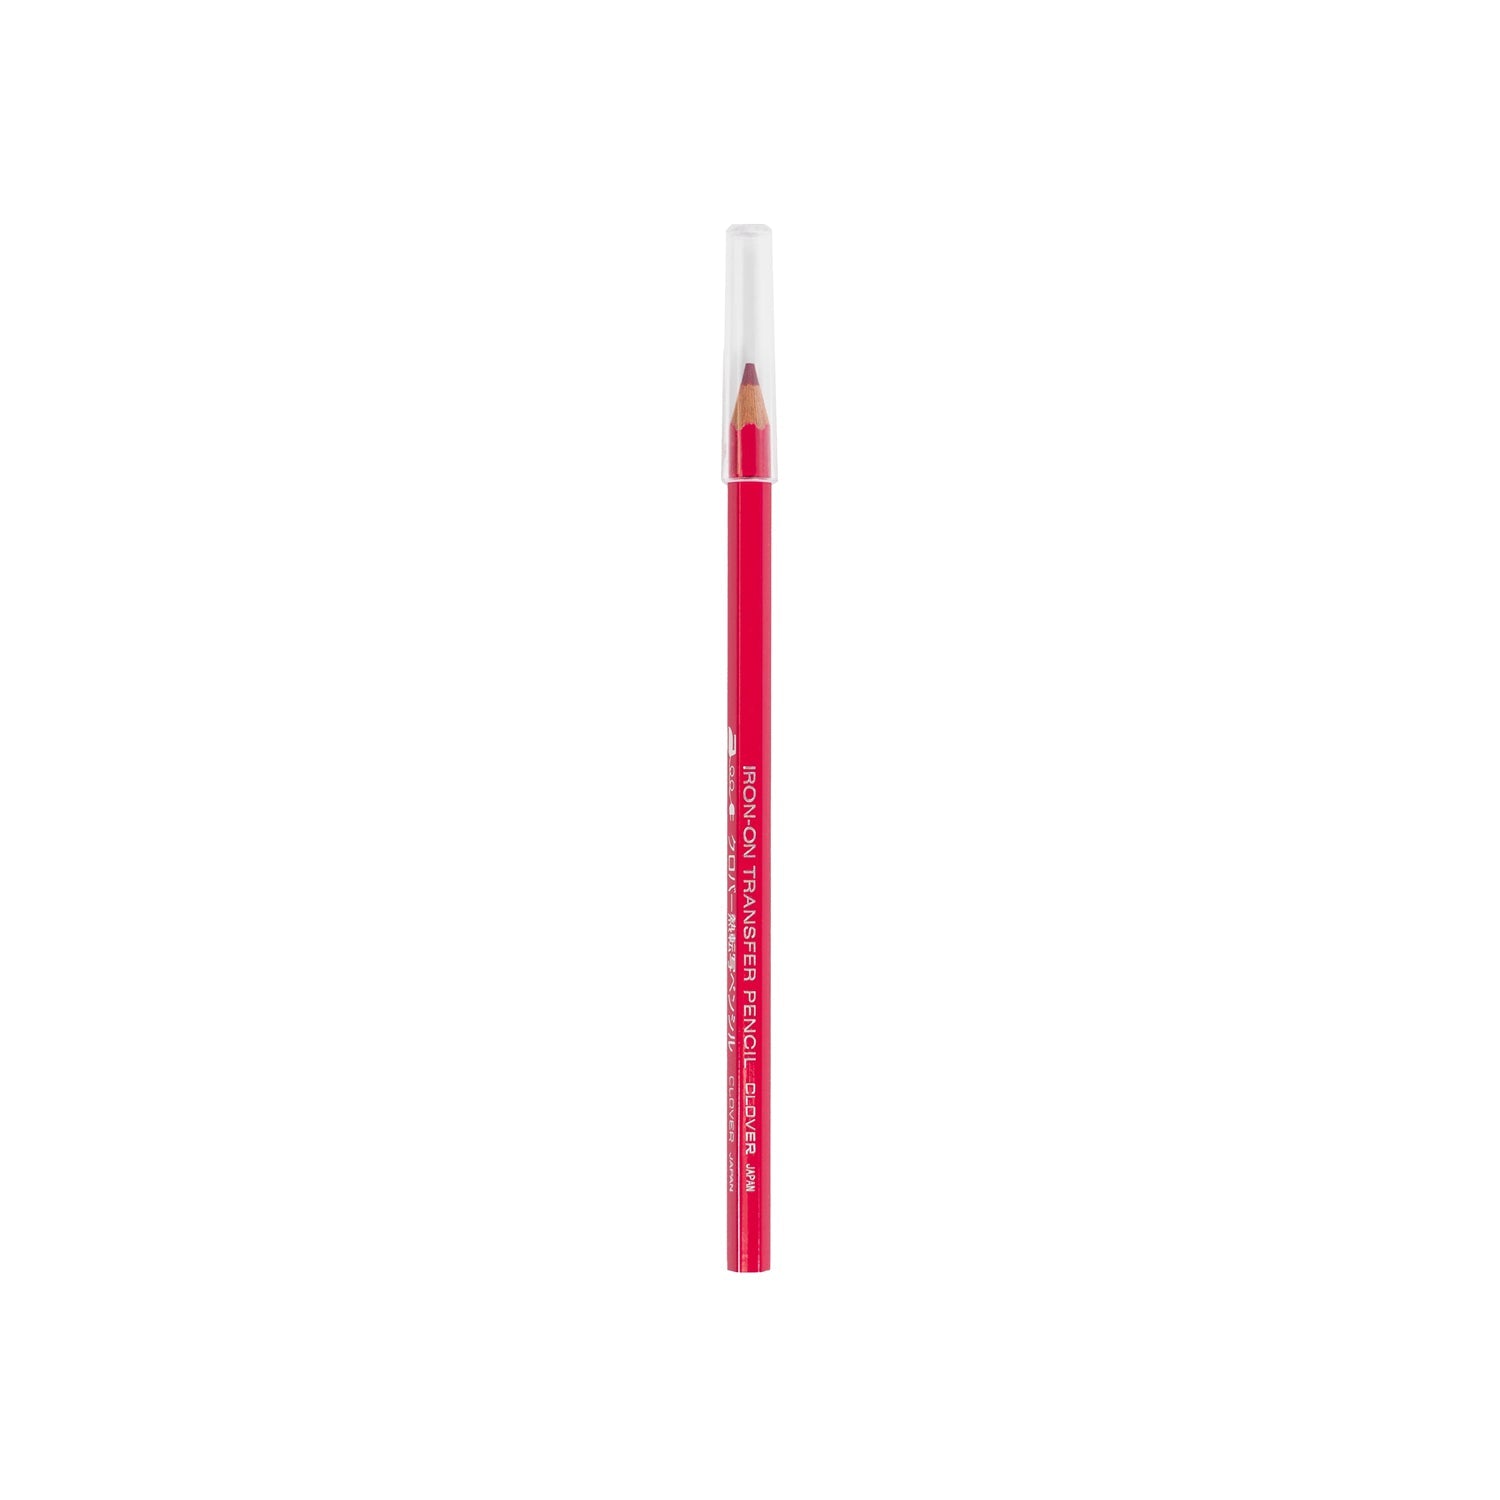 CLV - Iron-On Transfer Pencil (Red) - 0